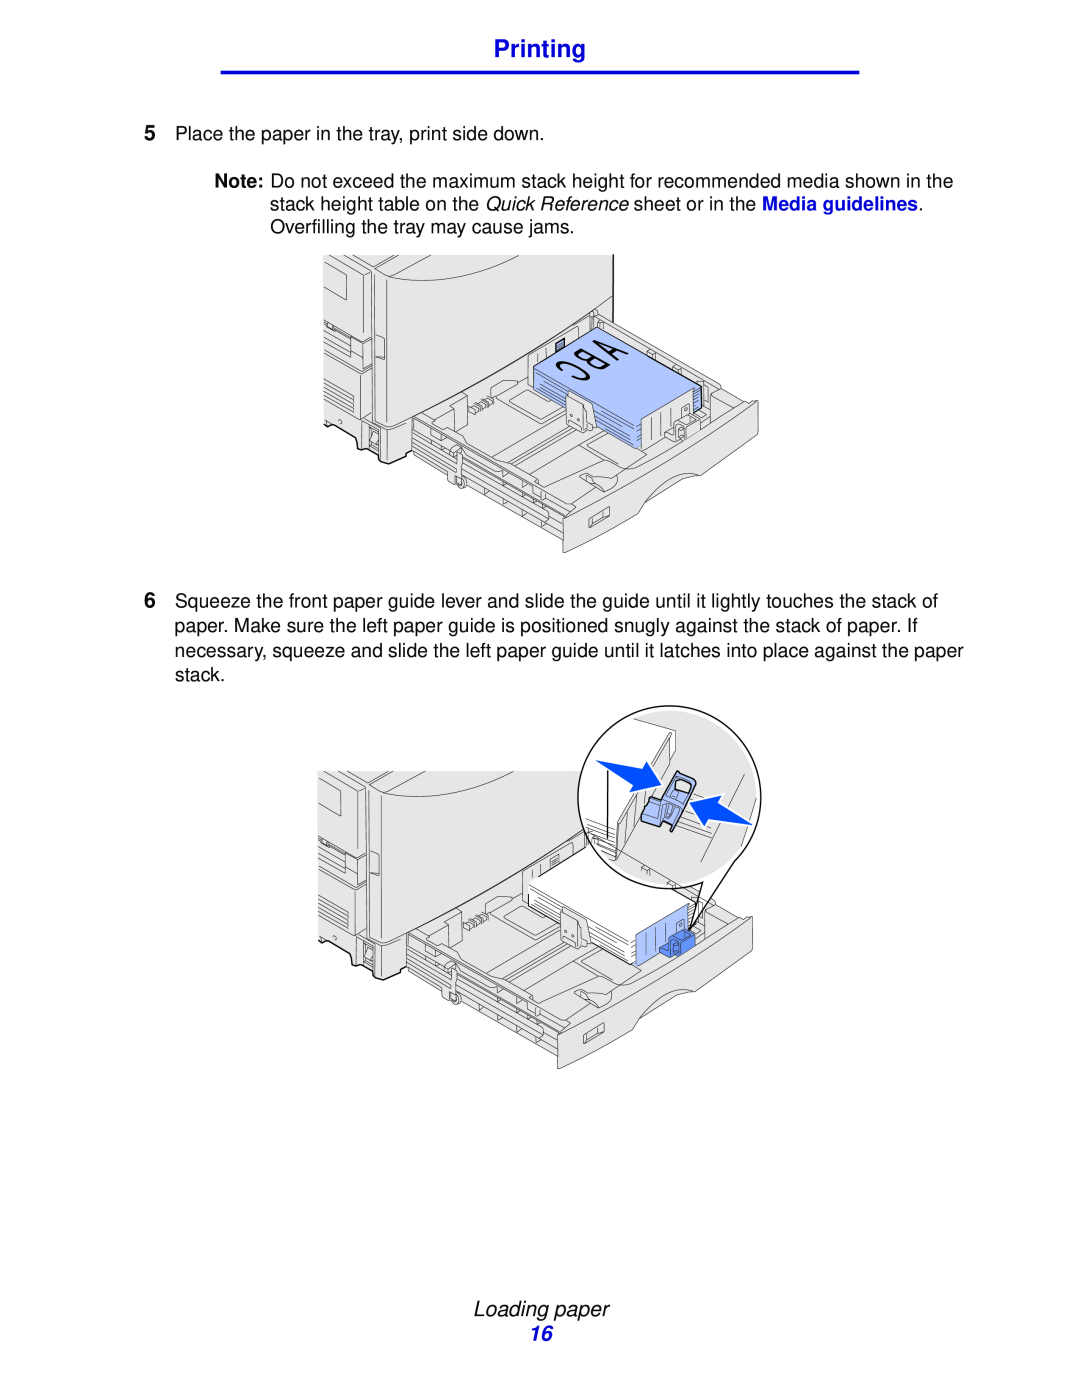 Lexmark 912 manual Printing, Loading paper, Place the paper in the tray, print side down 